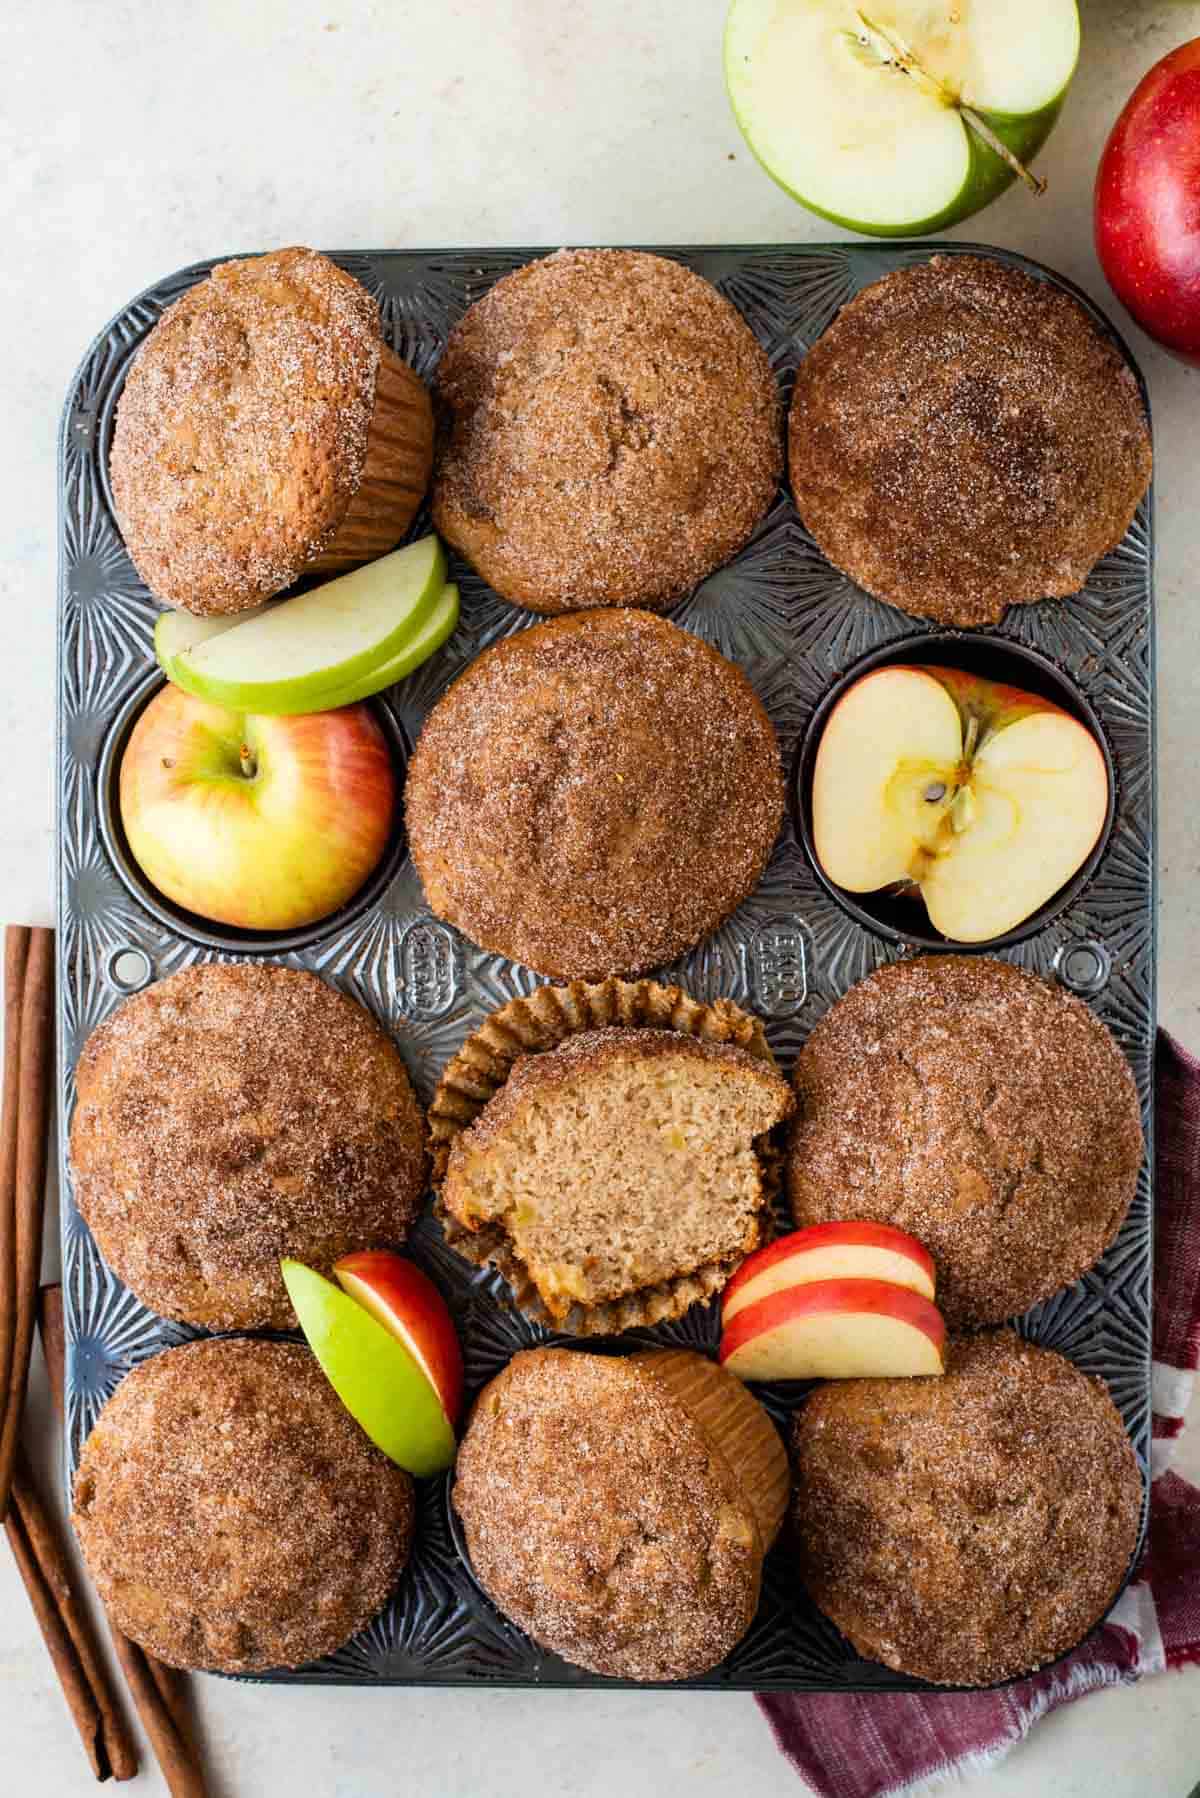 a muffin pan full of apple cinnamon muffins, red and green apple slices, half apples and whole apples, surrounded by cinnamon sticks and more apples